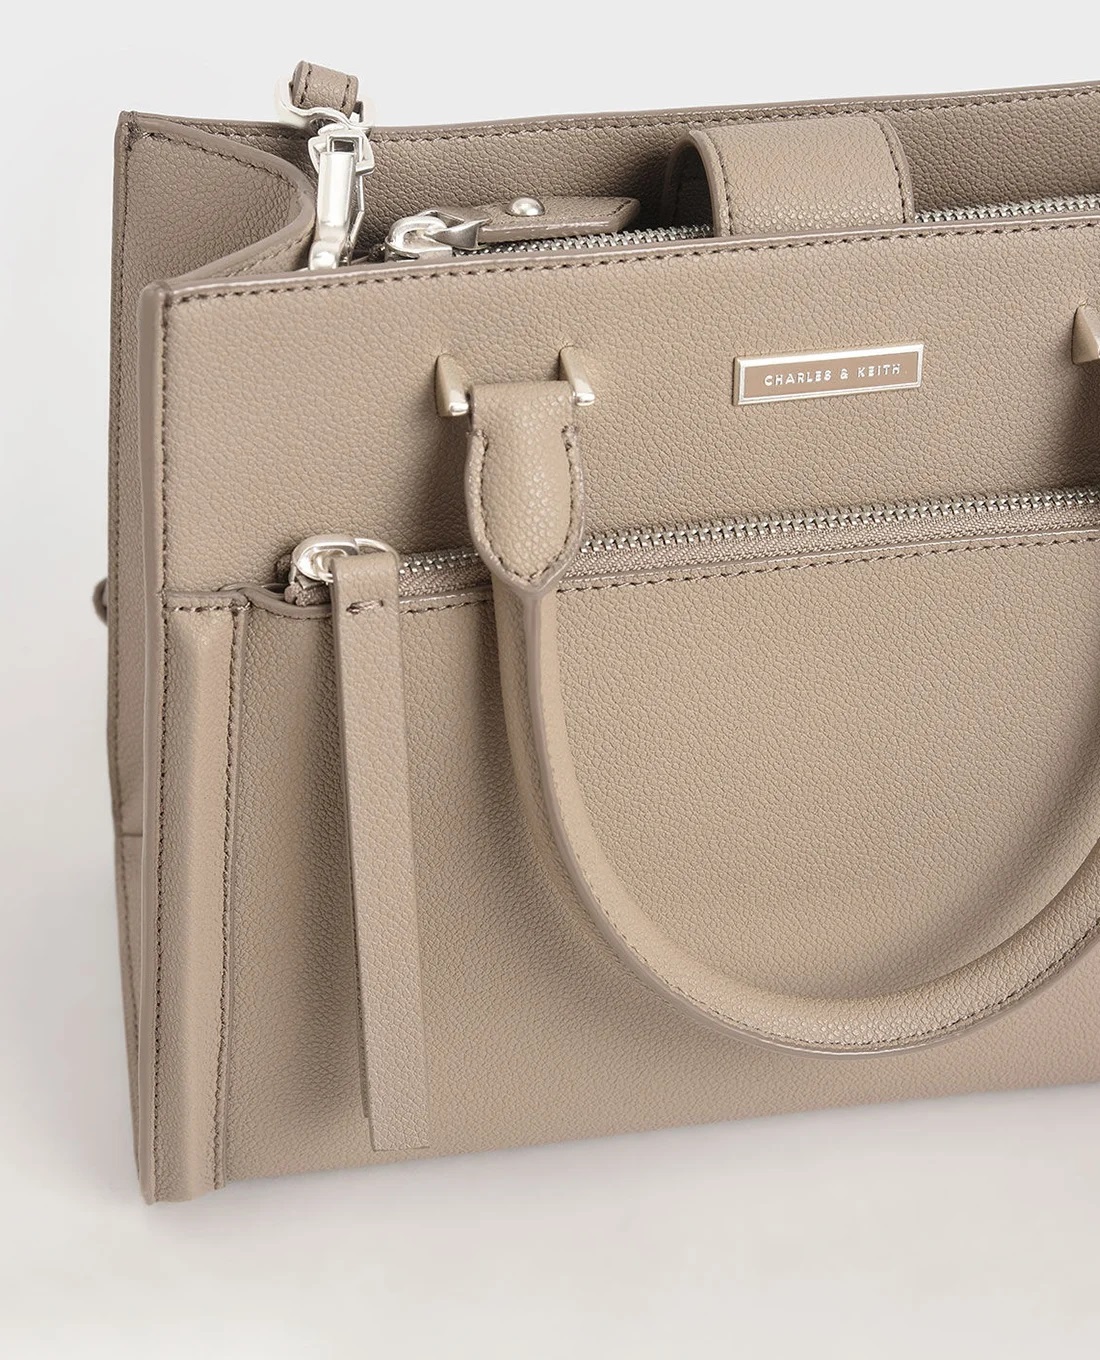 TÚI CHARLES KEITH DOUBLE HANDLE FRONT ZIP TOTE BAG 16